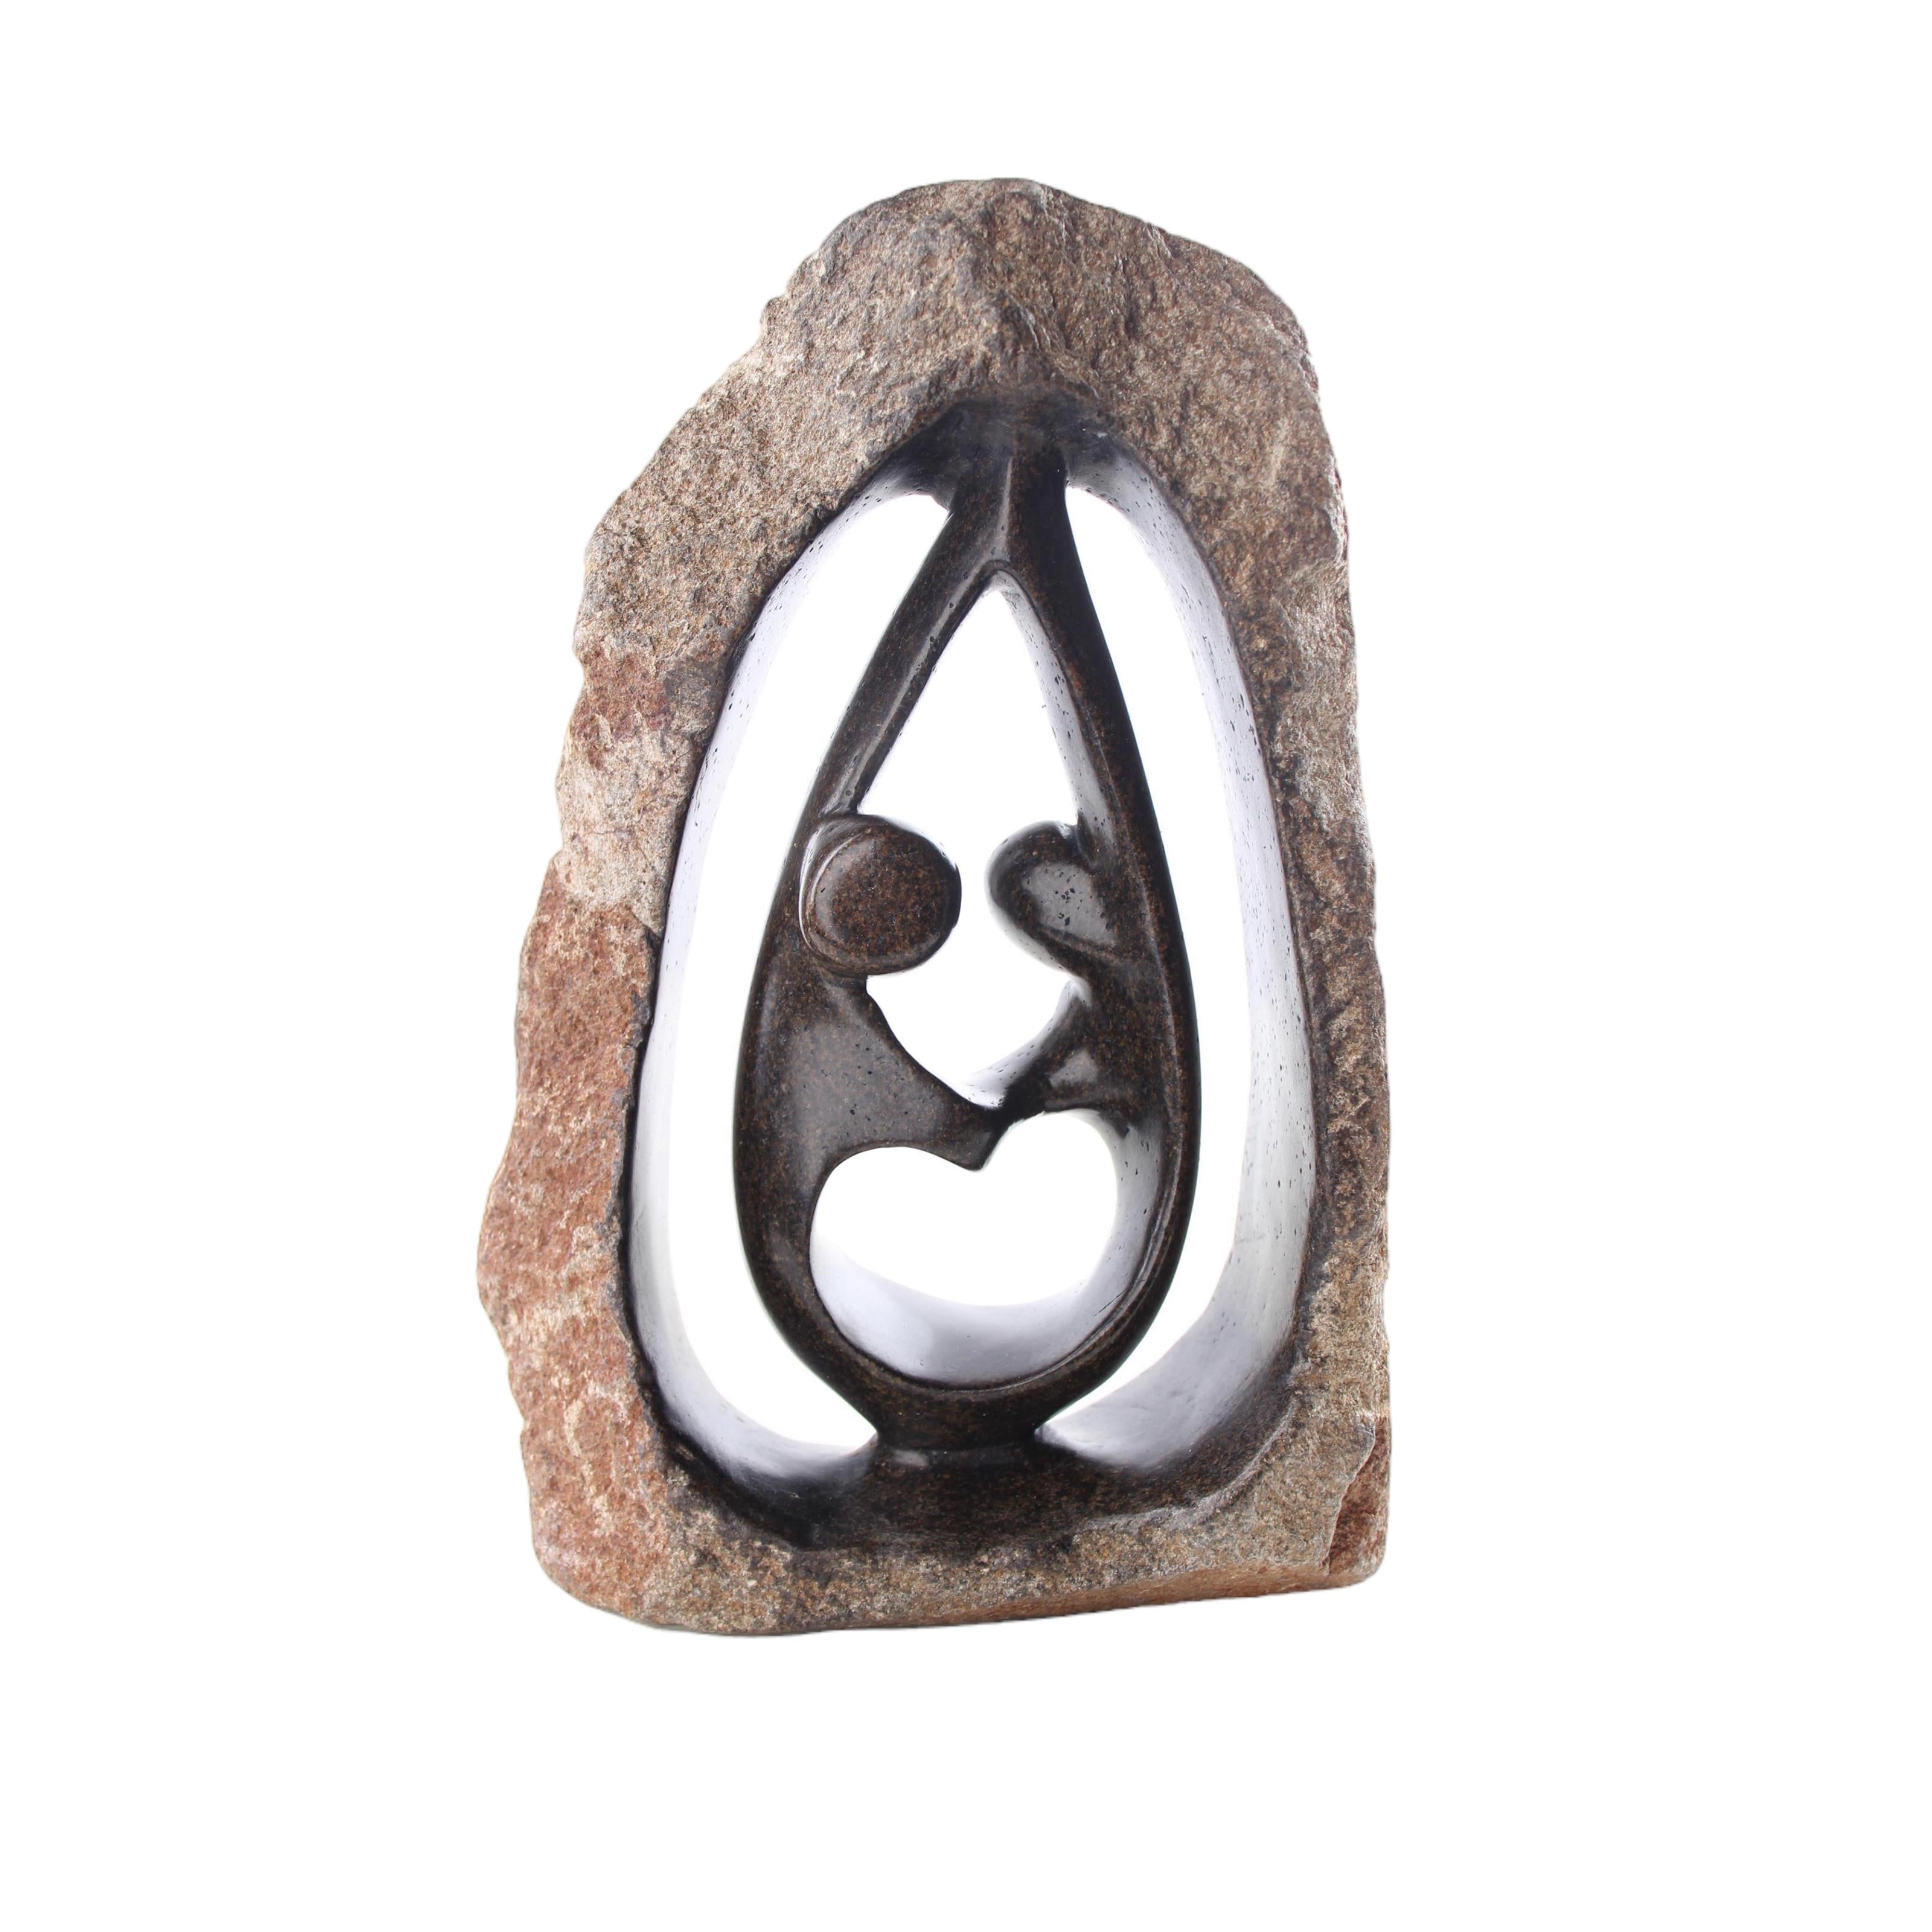 Shona Tribe Serpentine Stone Couples ~9.6" Tall - Couples